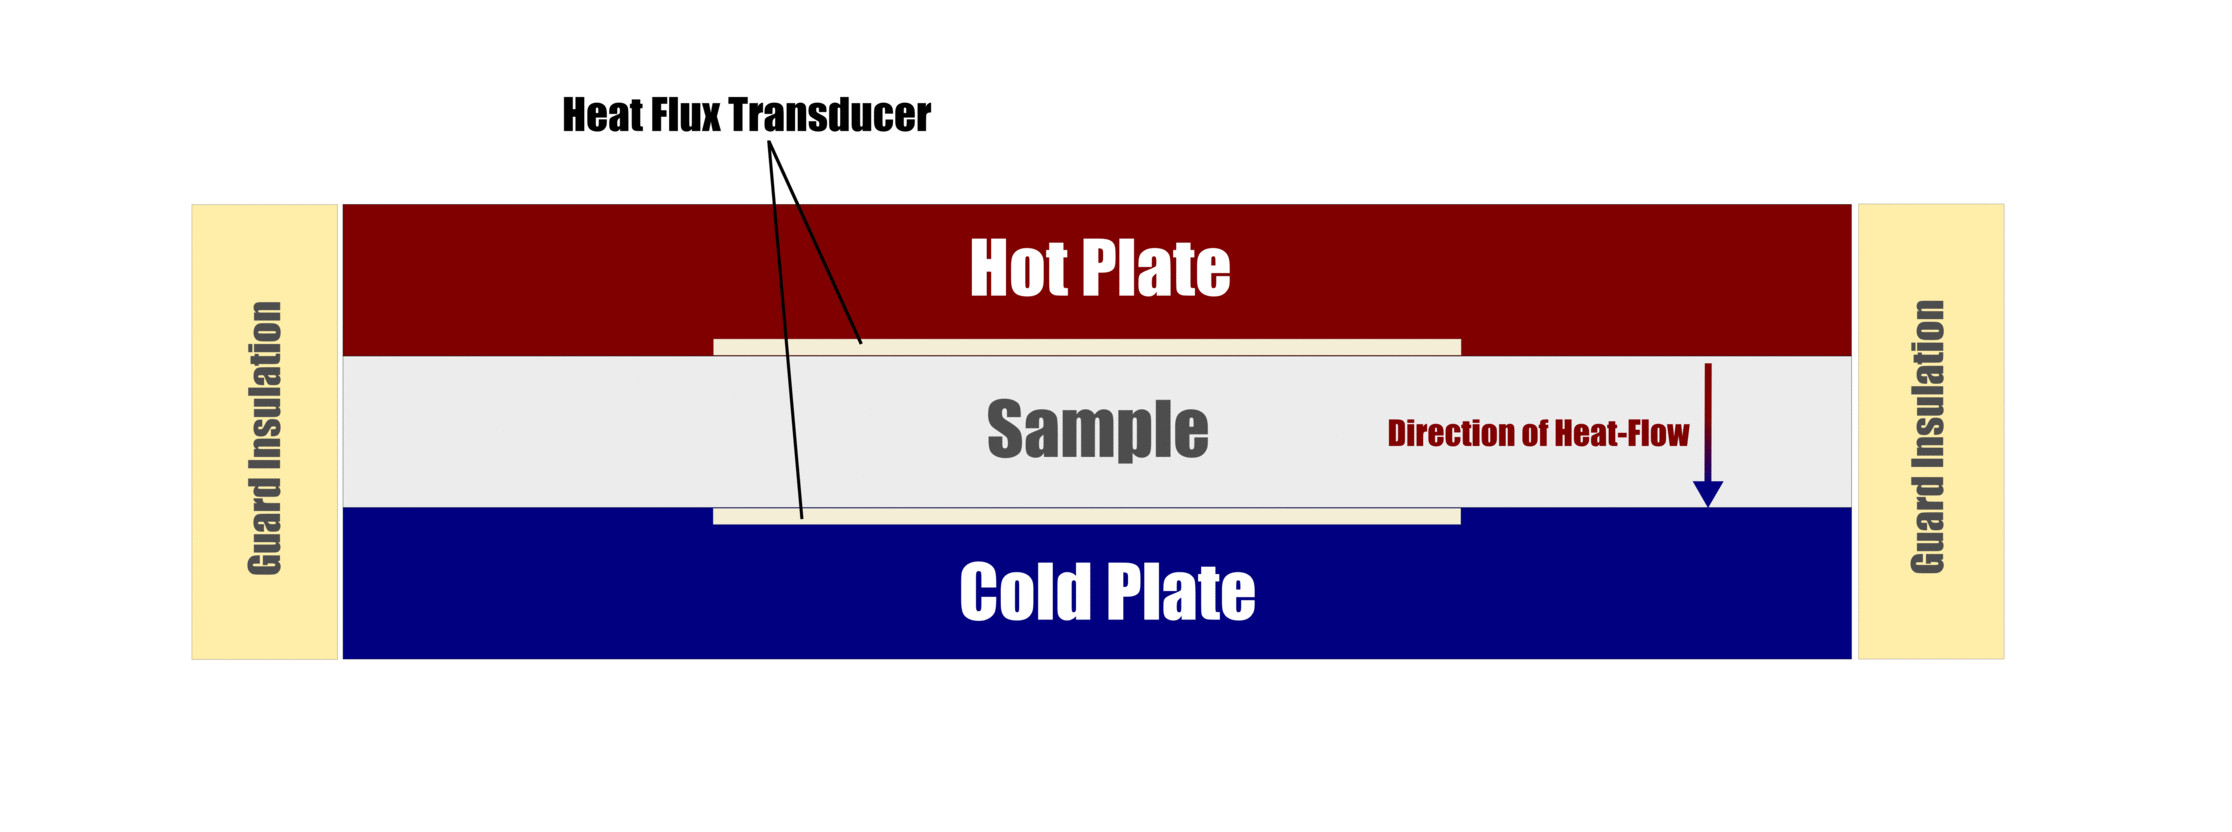 The picture shows the working principle of a heat flow meter